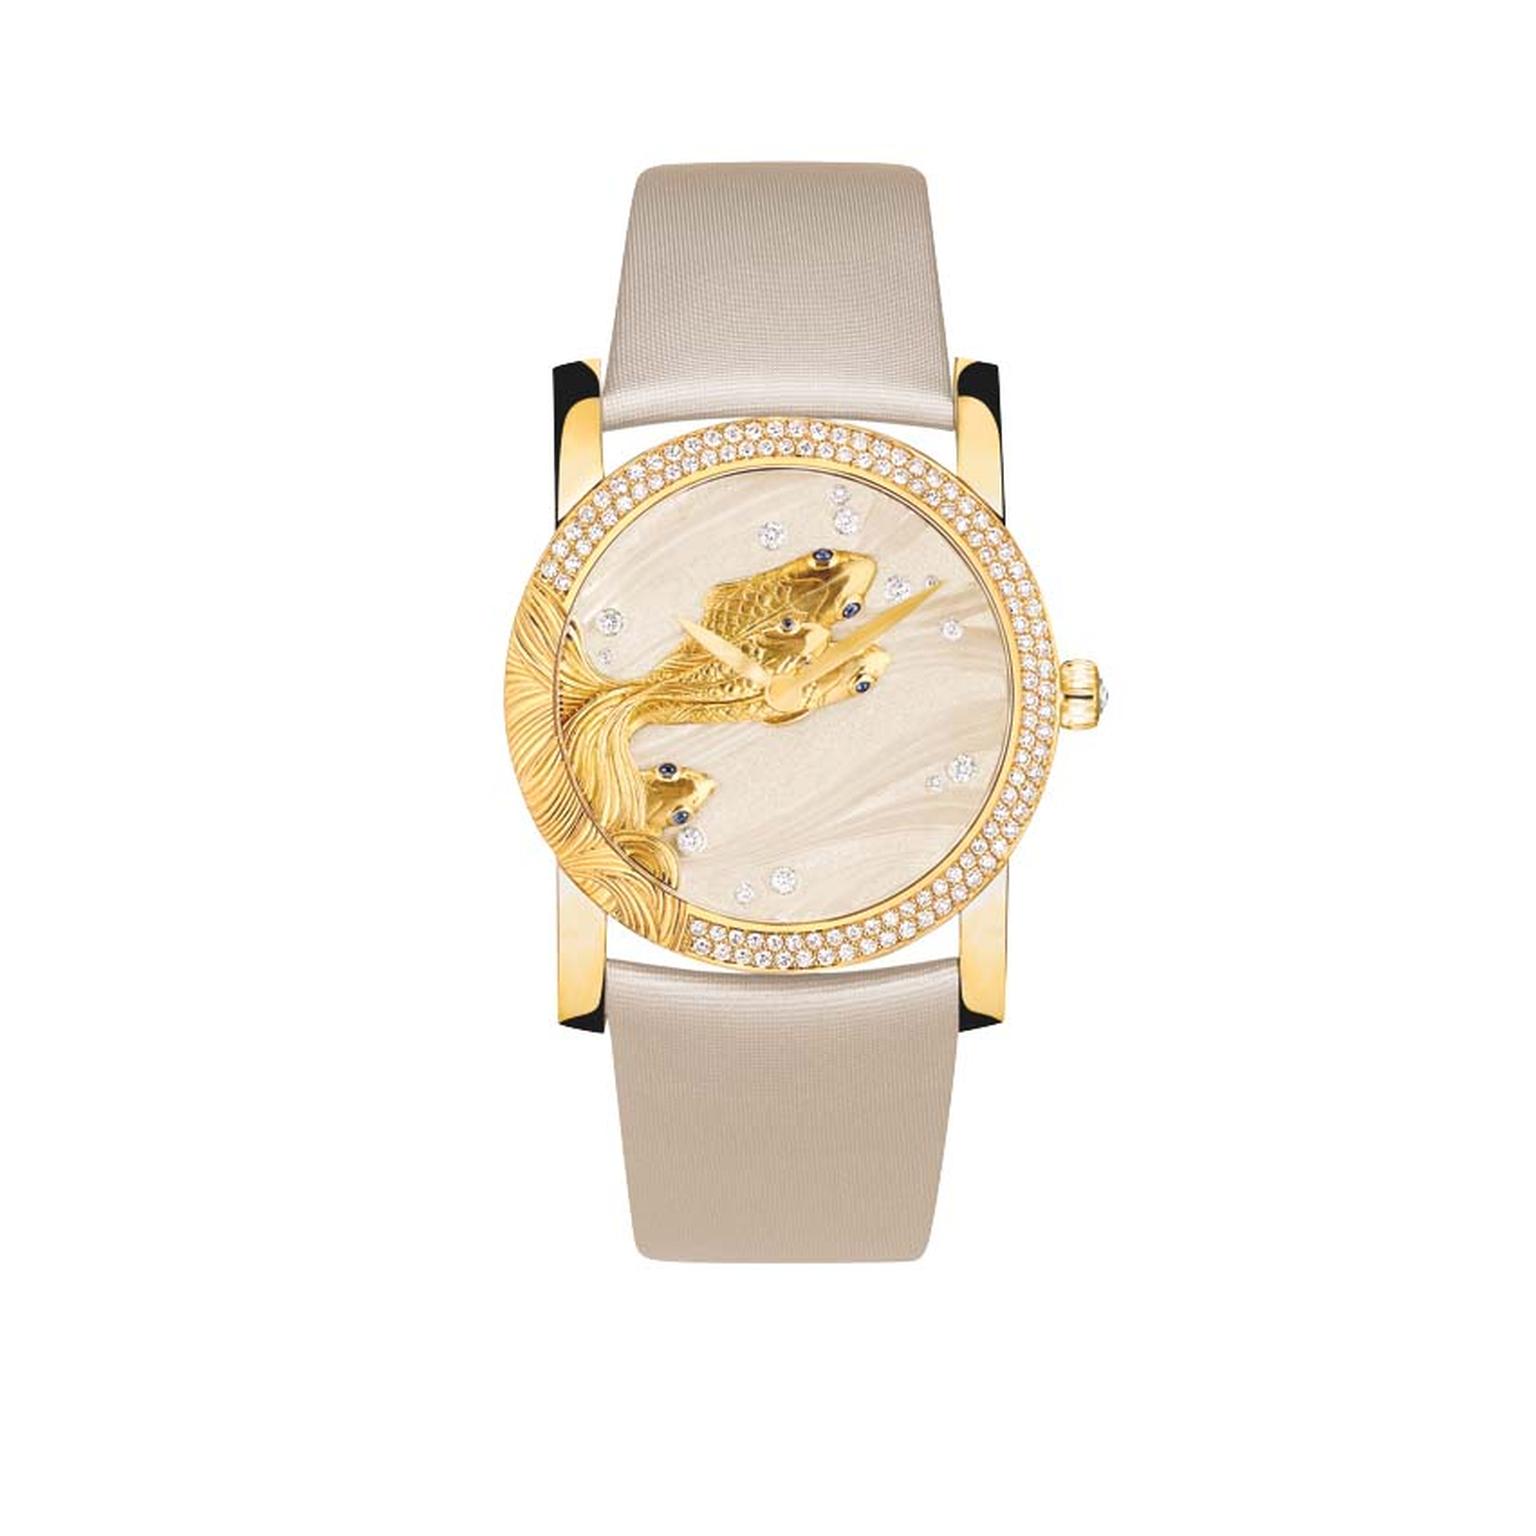 Chaumet watches included this fish-inspired dial in its Lumières d'Eau high jewellery collection. The 35mm yellow gold case with its diamond-set bezel comes to life as a shoal of hand-sculpted gold carp dart across the waves engraved on the white lacquer.